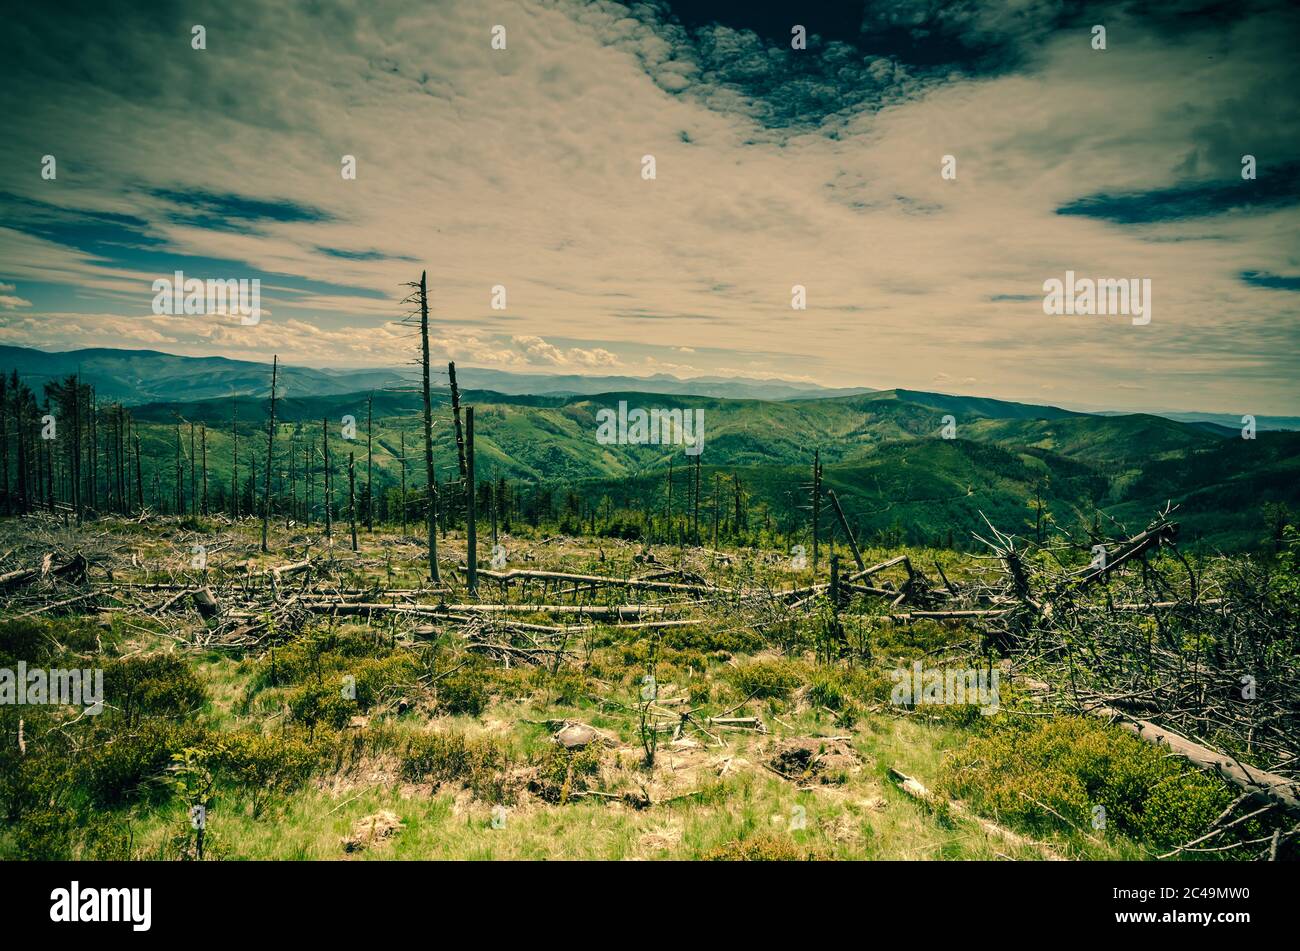 Panoramic view of a clearing with old withered tree trunks with a mountain range in the background Stock Photo